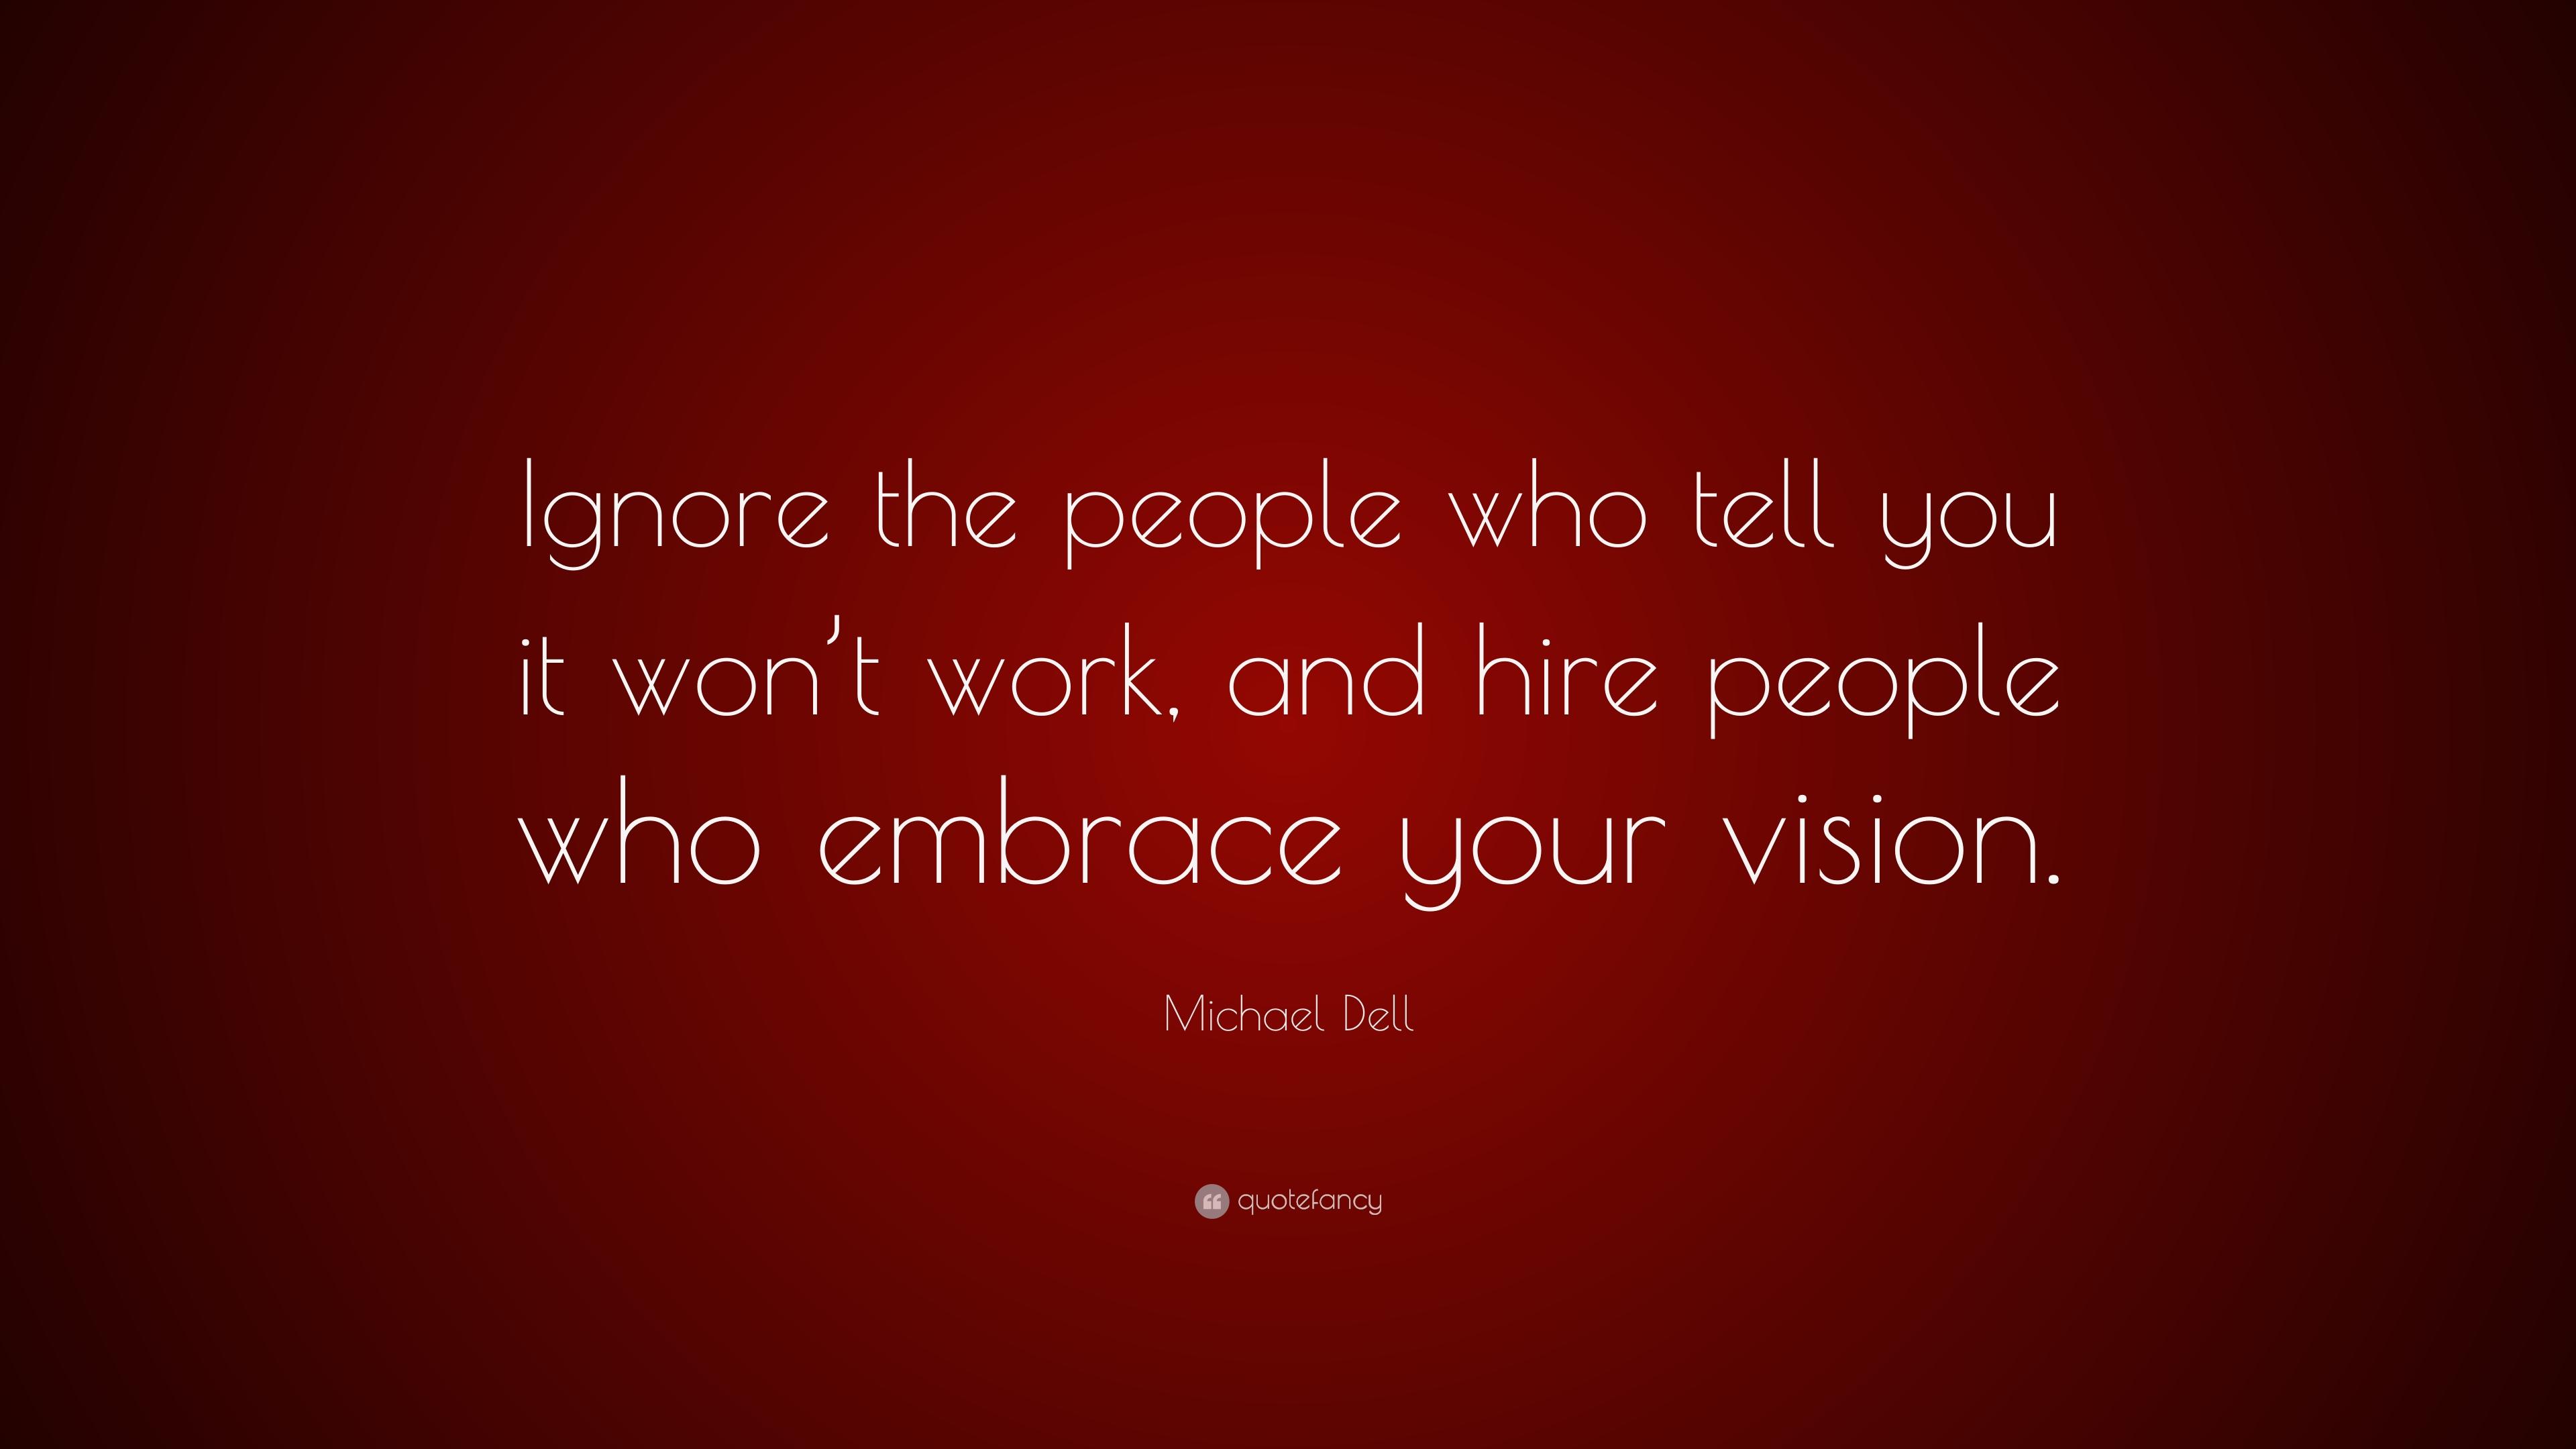 Michael Dell Quote: “Ignore the people who tell you it won't work